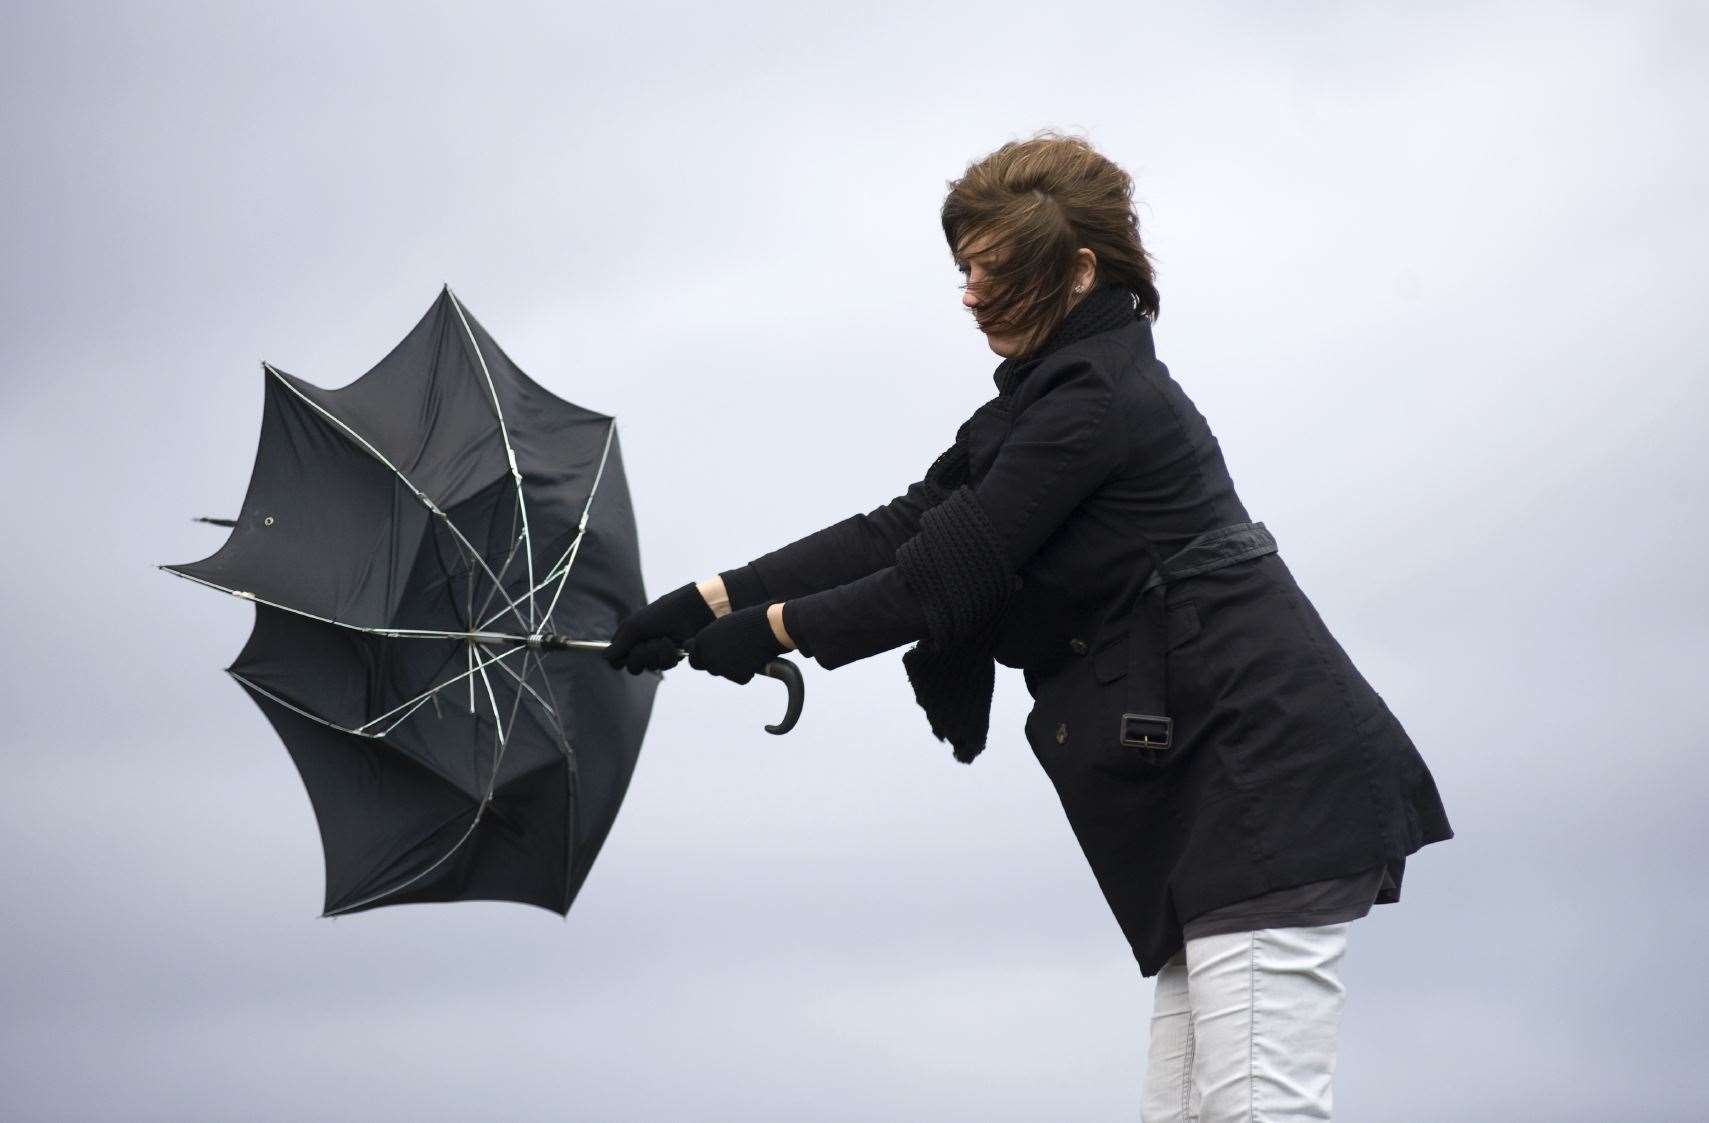 The Met Office has issued a yellow wind weather warning for Saturday